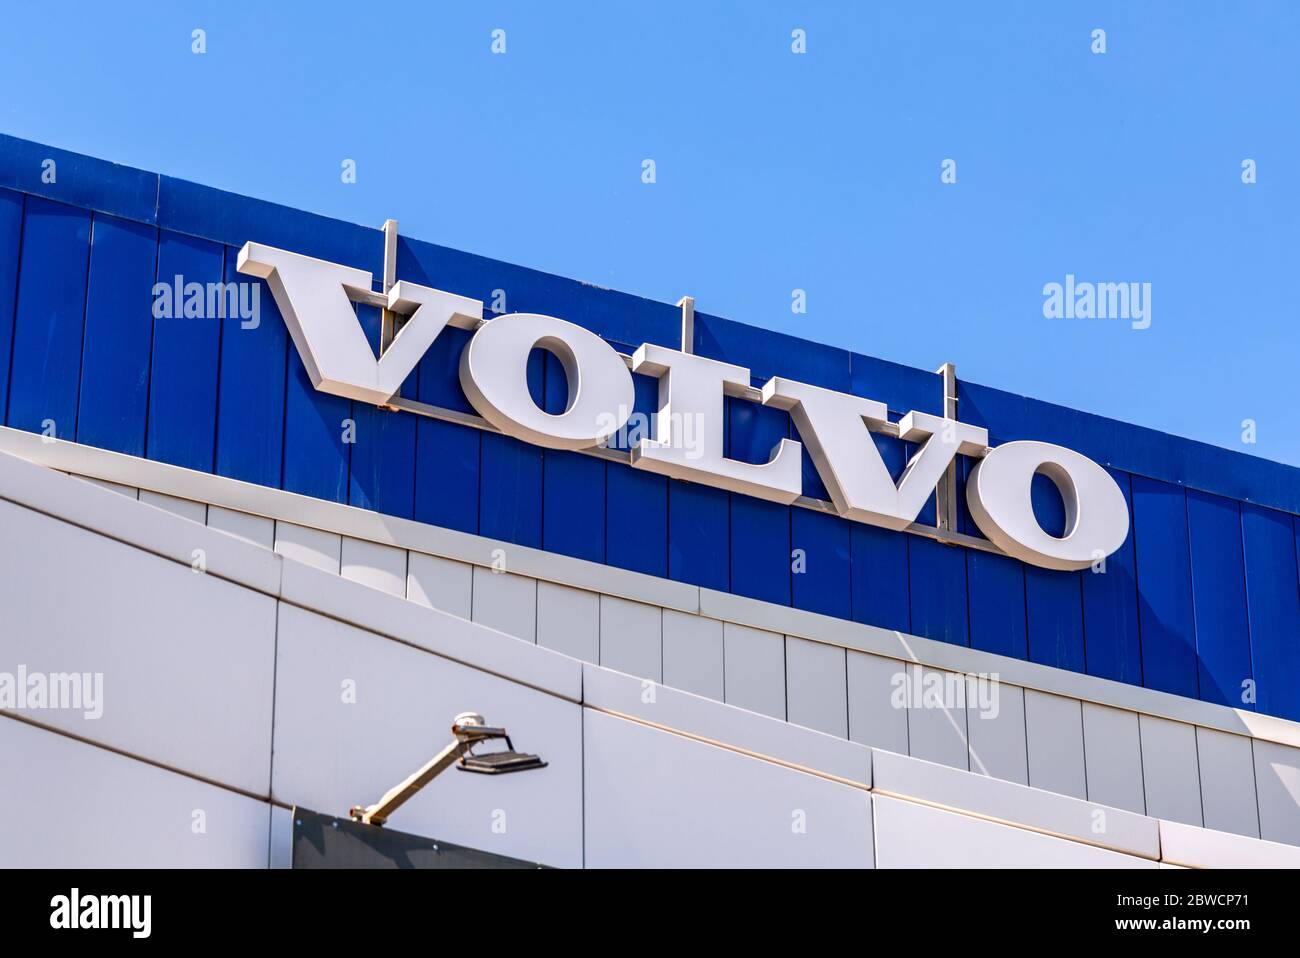 Samara, Russia - May 29, 2020: Volvo dealership sign on the office of official dealer. Volvo is a Swedish multinational automaker company Stock Photo